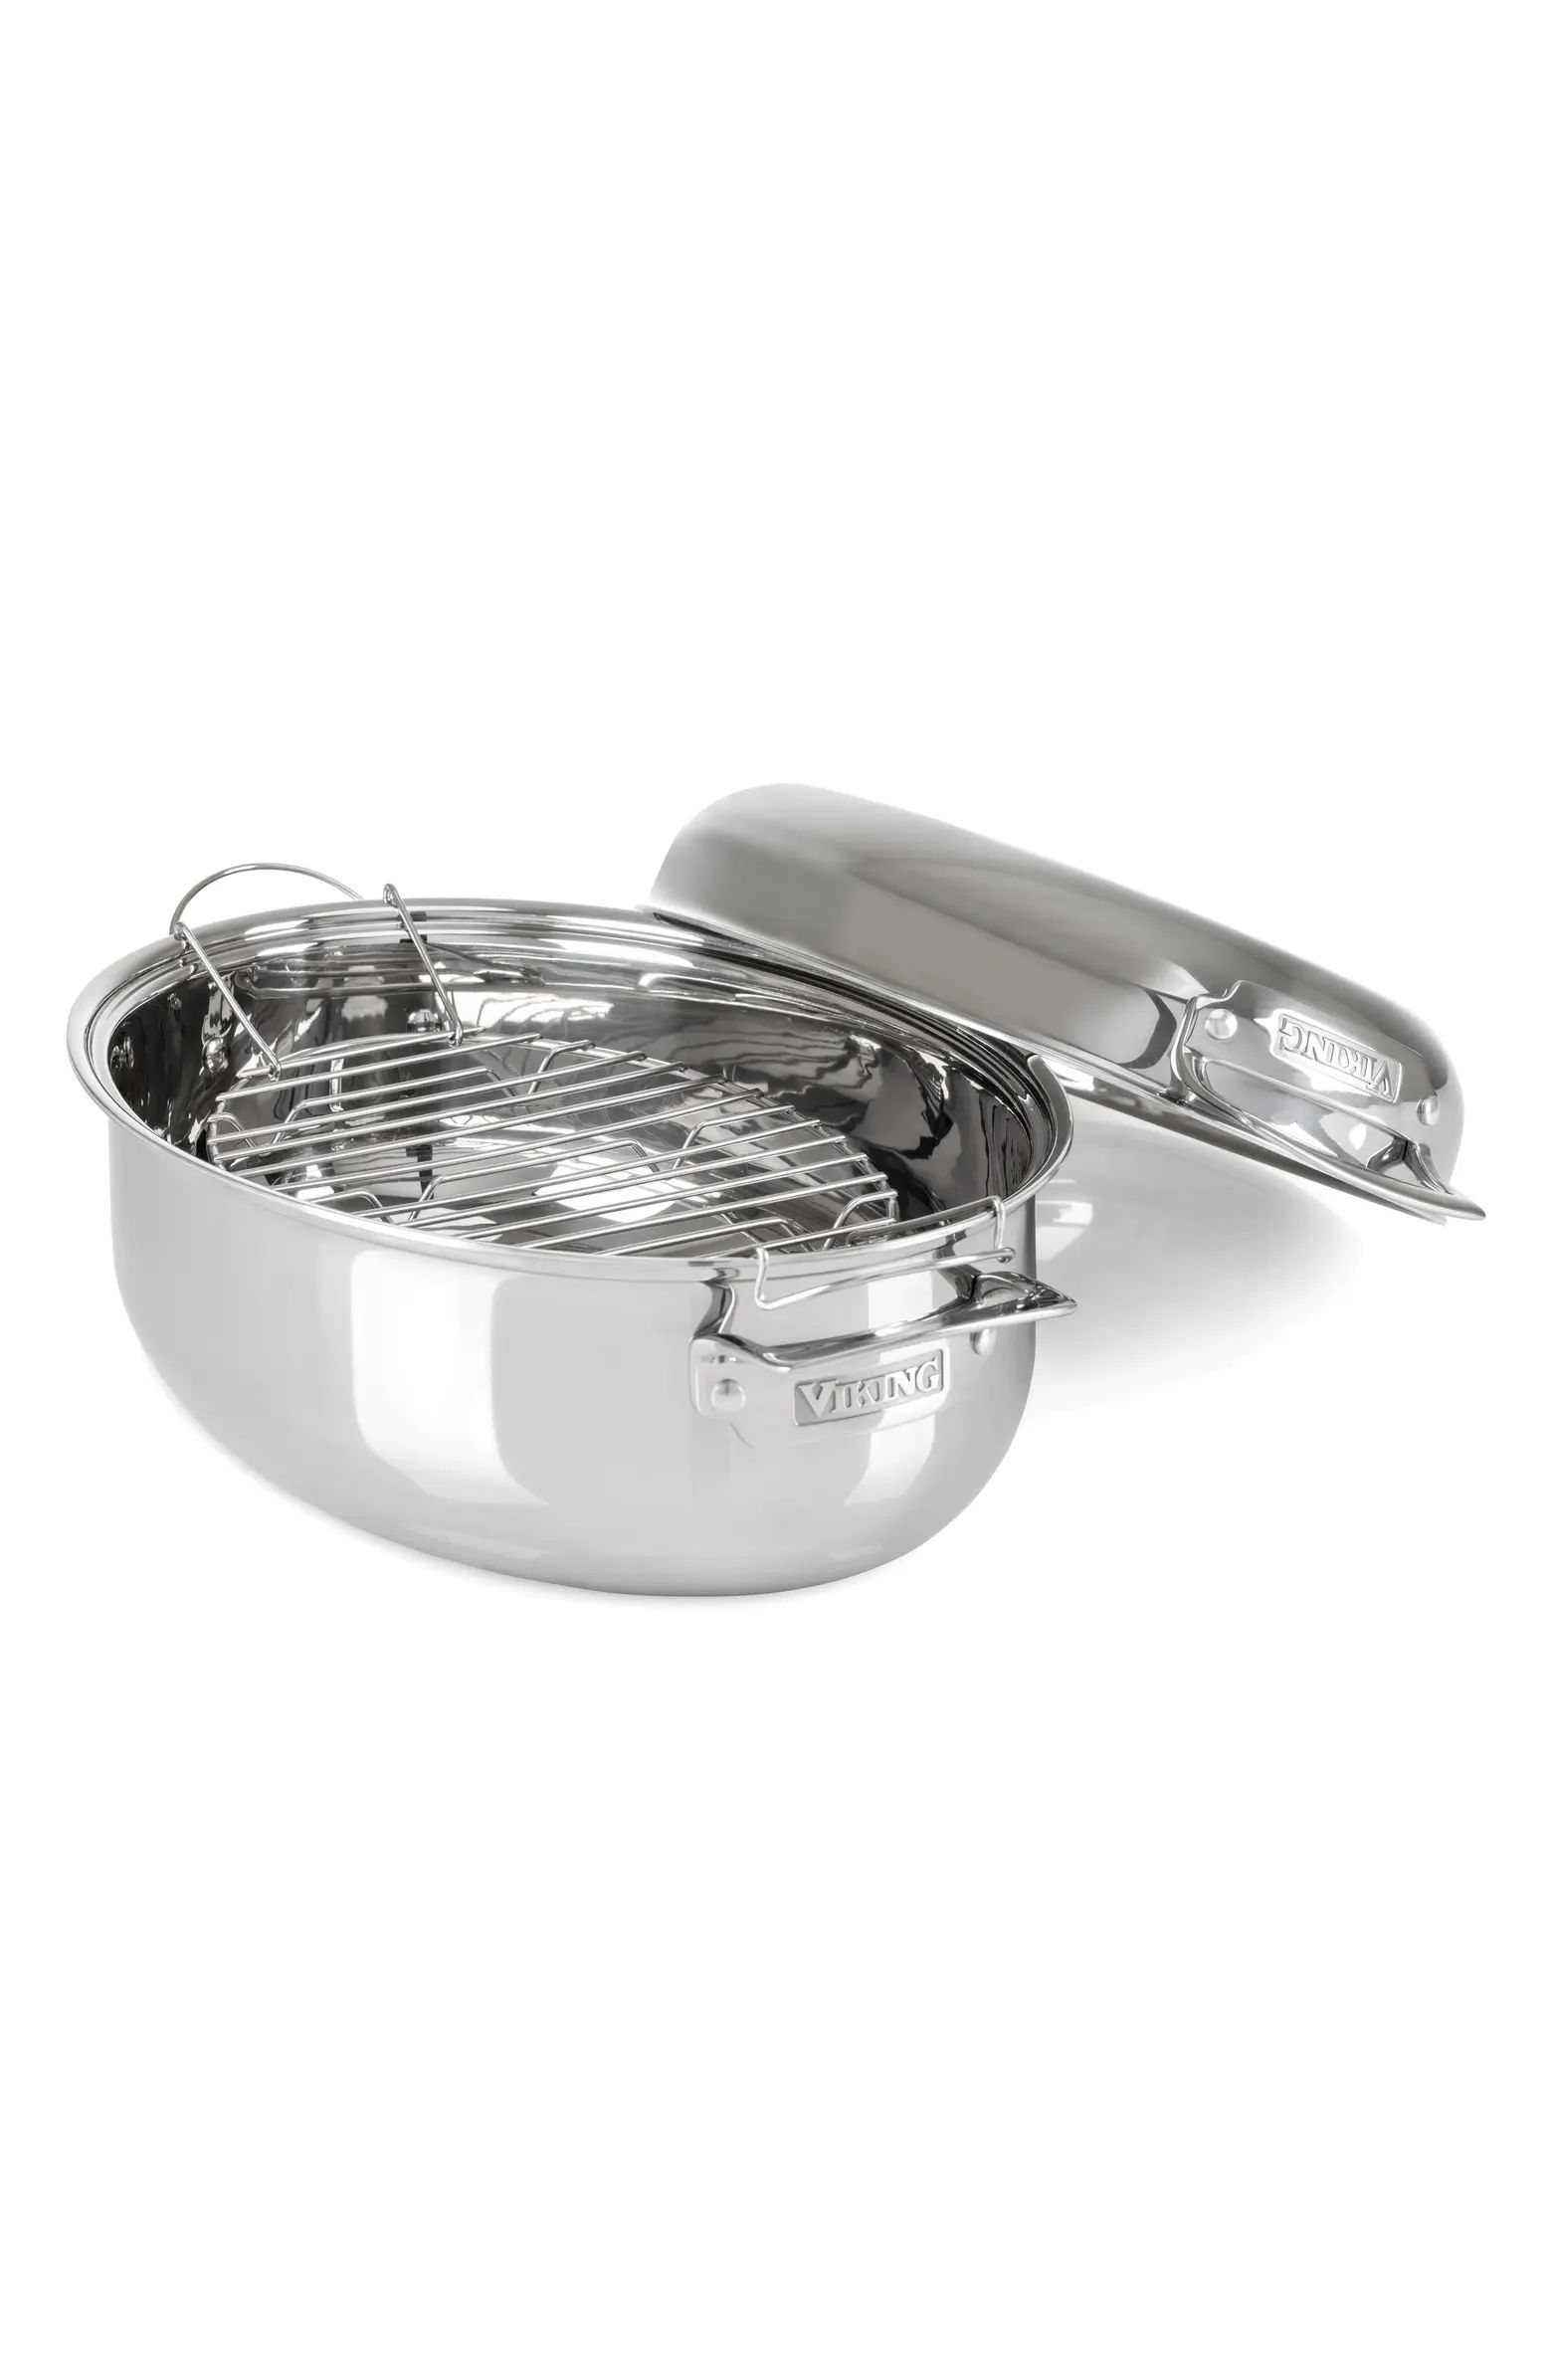 3-Ply 3-in-1 8.5-Quart Oval Roaster with Lid | Nordstrom